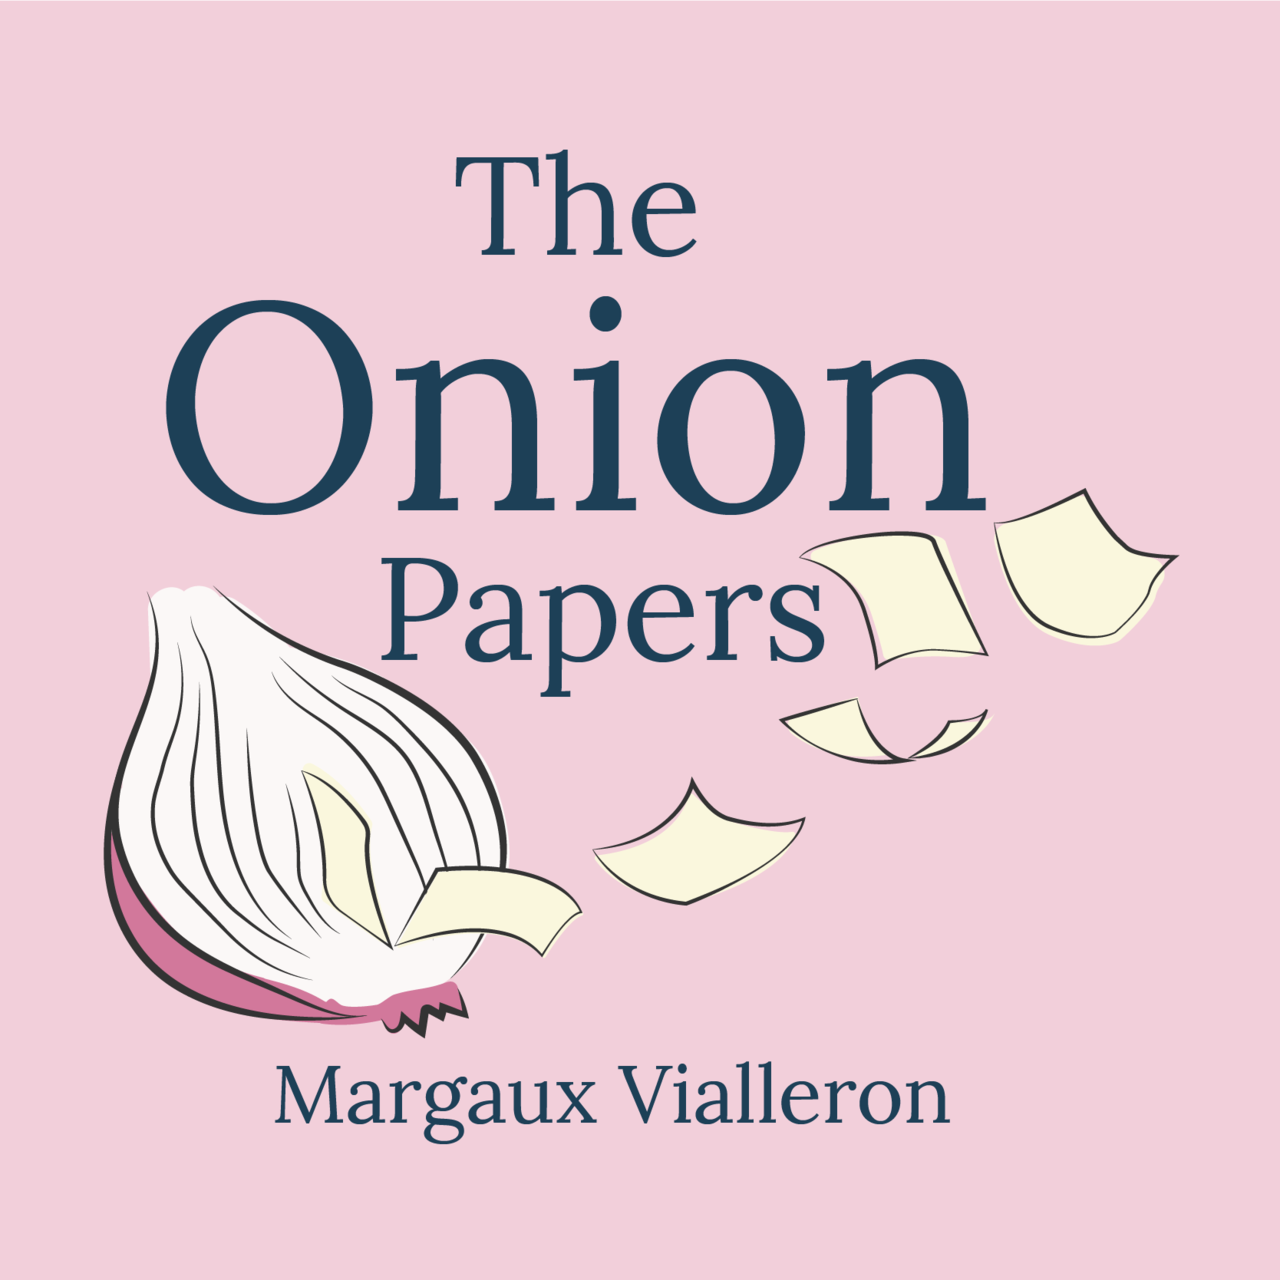 Artwork for The Onion Papers